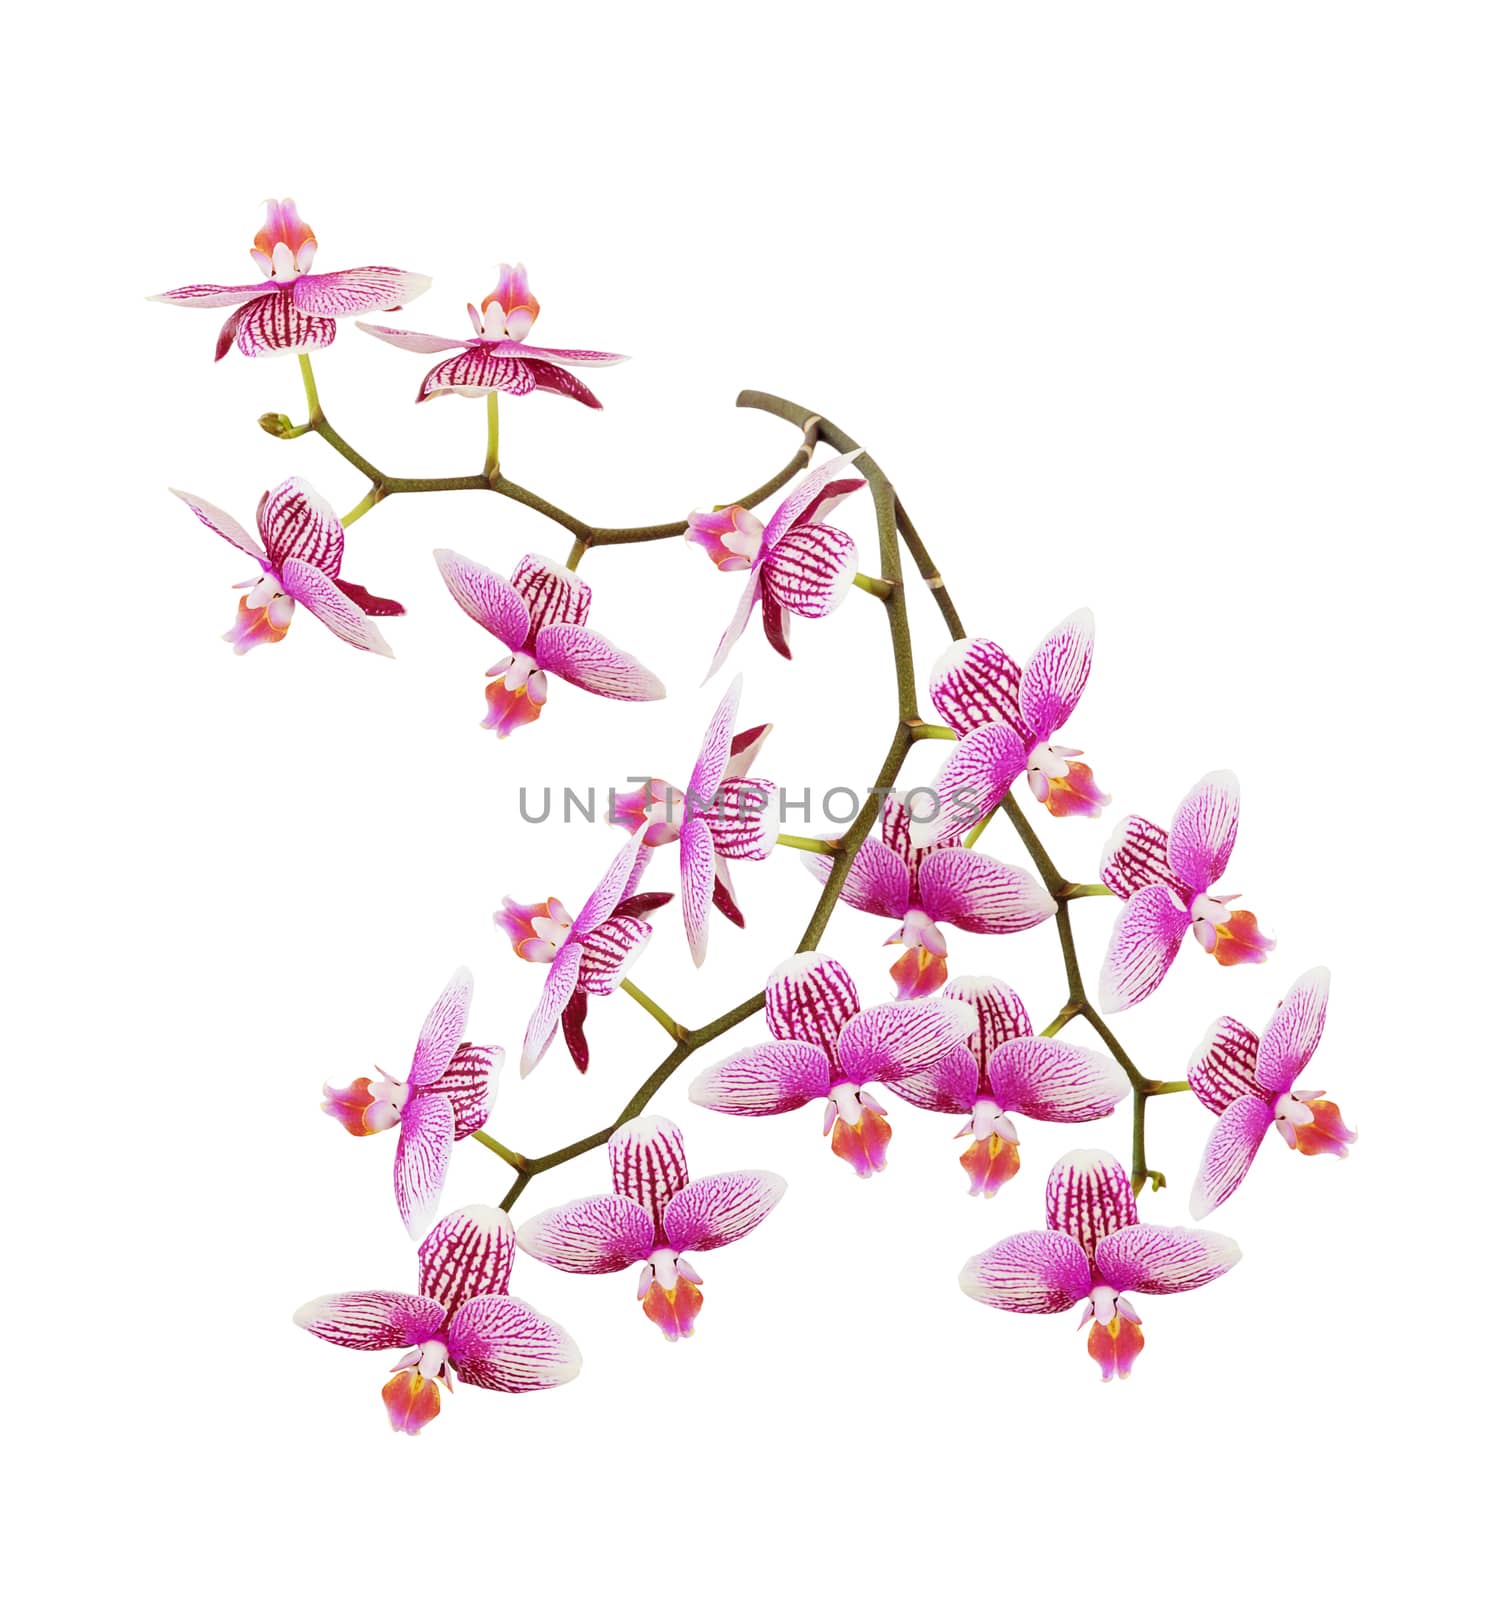 White and pink orchid flowers on a white background by Epitavi